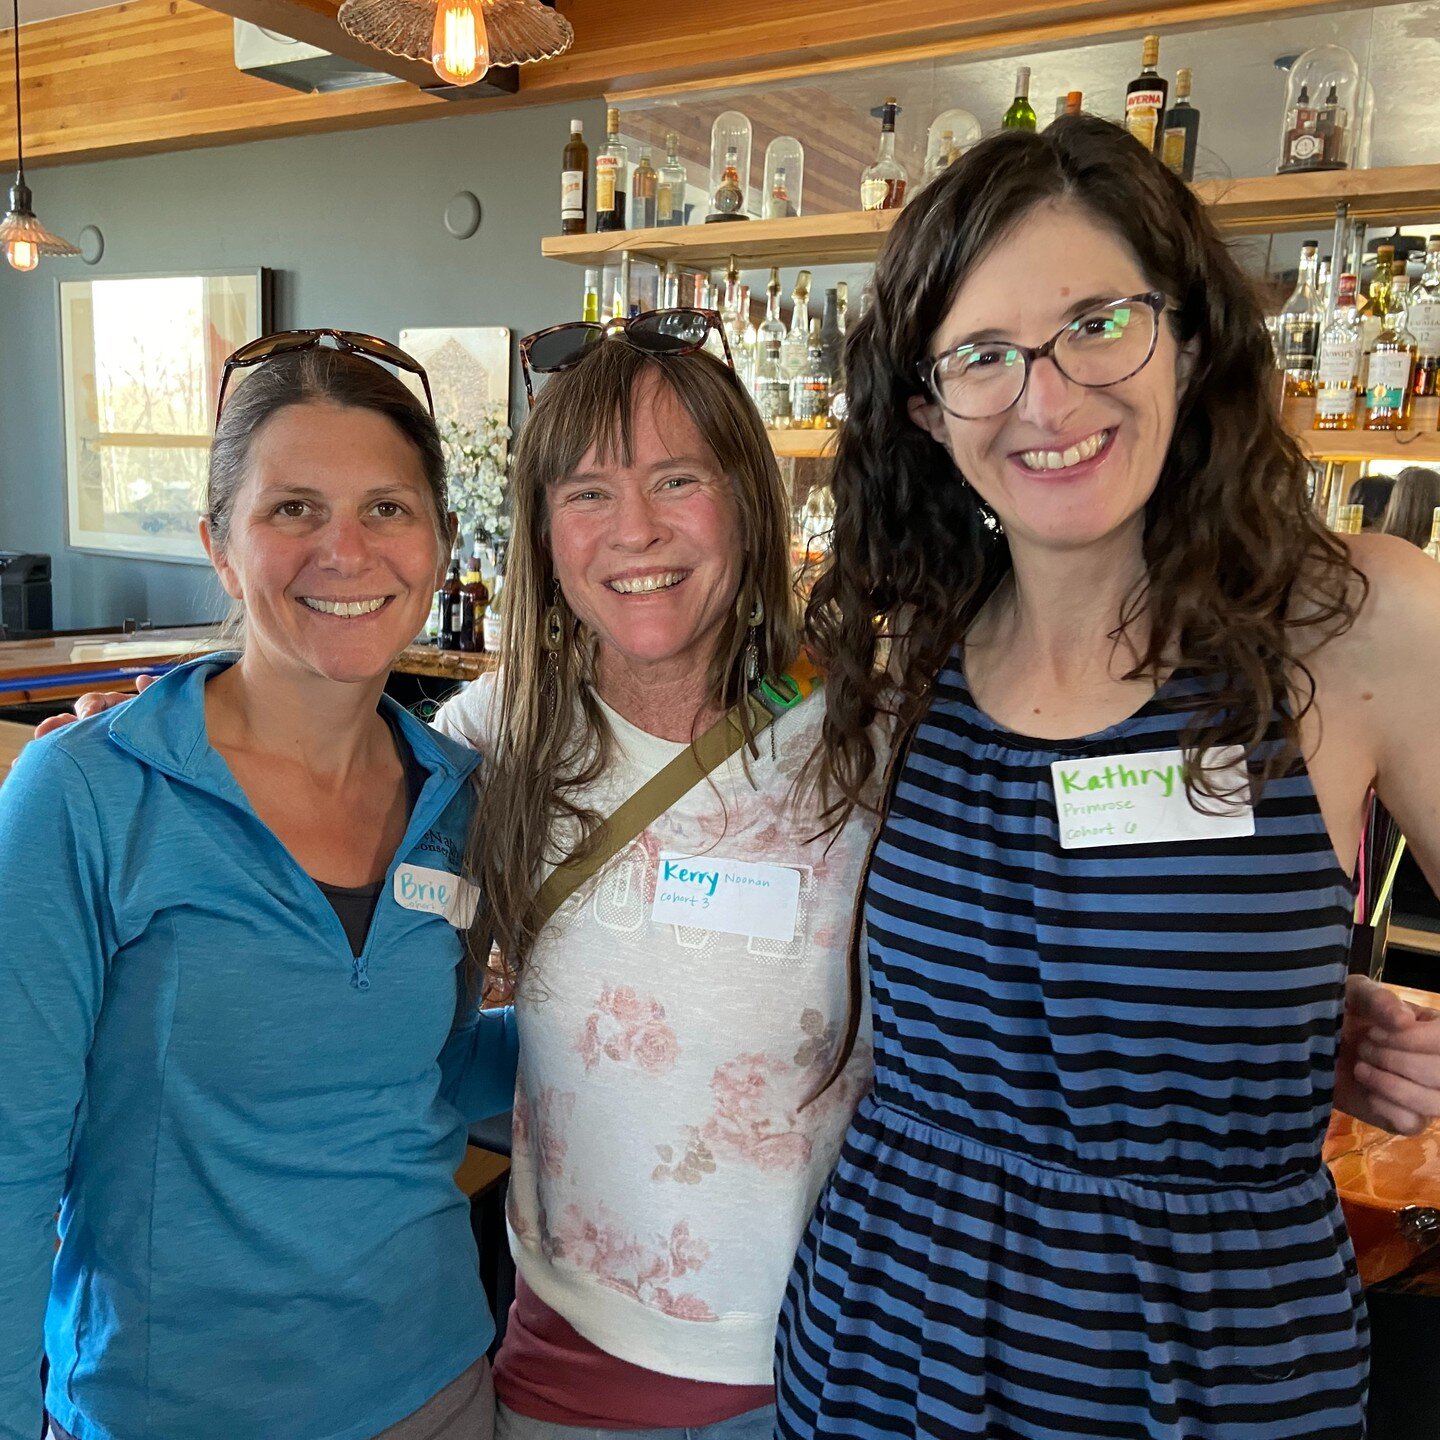 We loved catching up with alumnae and meeting new friends at the Womentum Happy Hour on Sunday! About 30 women stopped by The Loft, as Lander Womentum wraps up its 6th year of connecting women through programs designed to help us thrive.

Our 7th pro